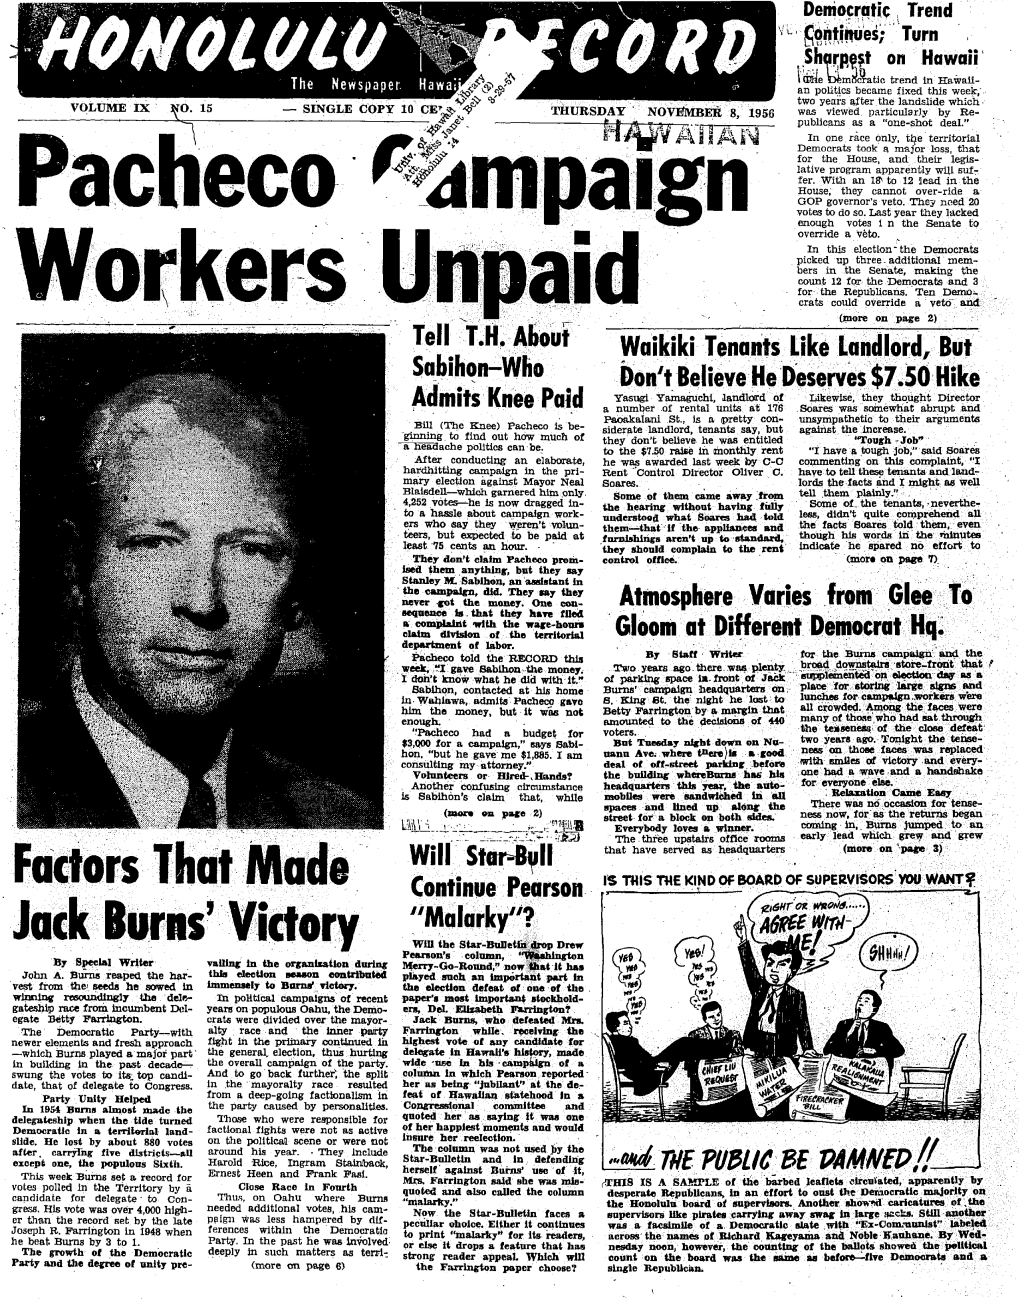 Pacheco Rampaign Workers Unpaid